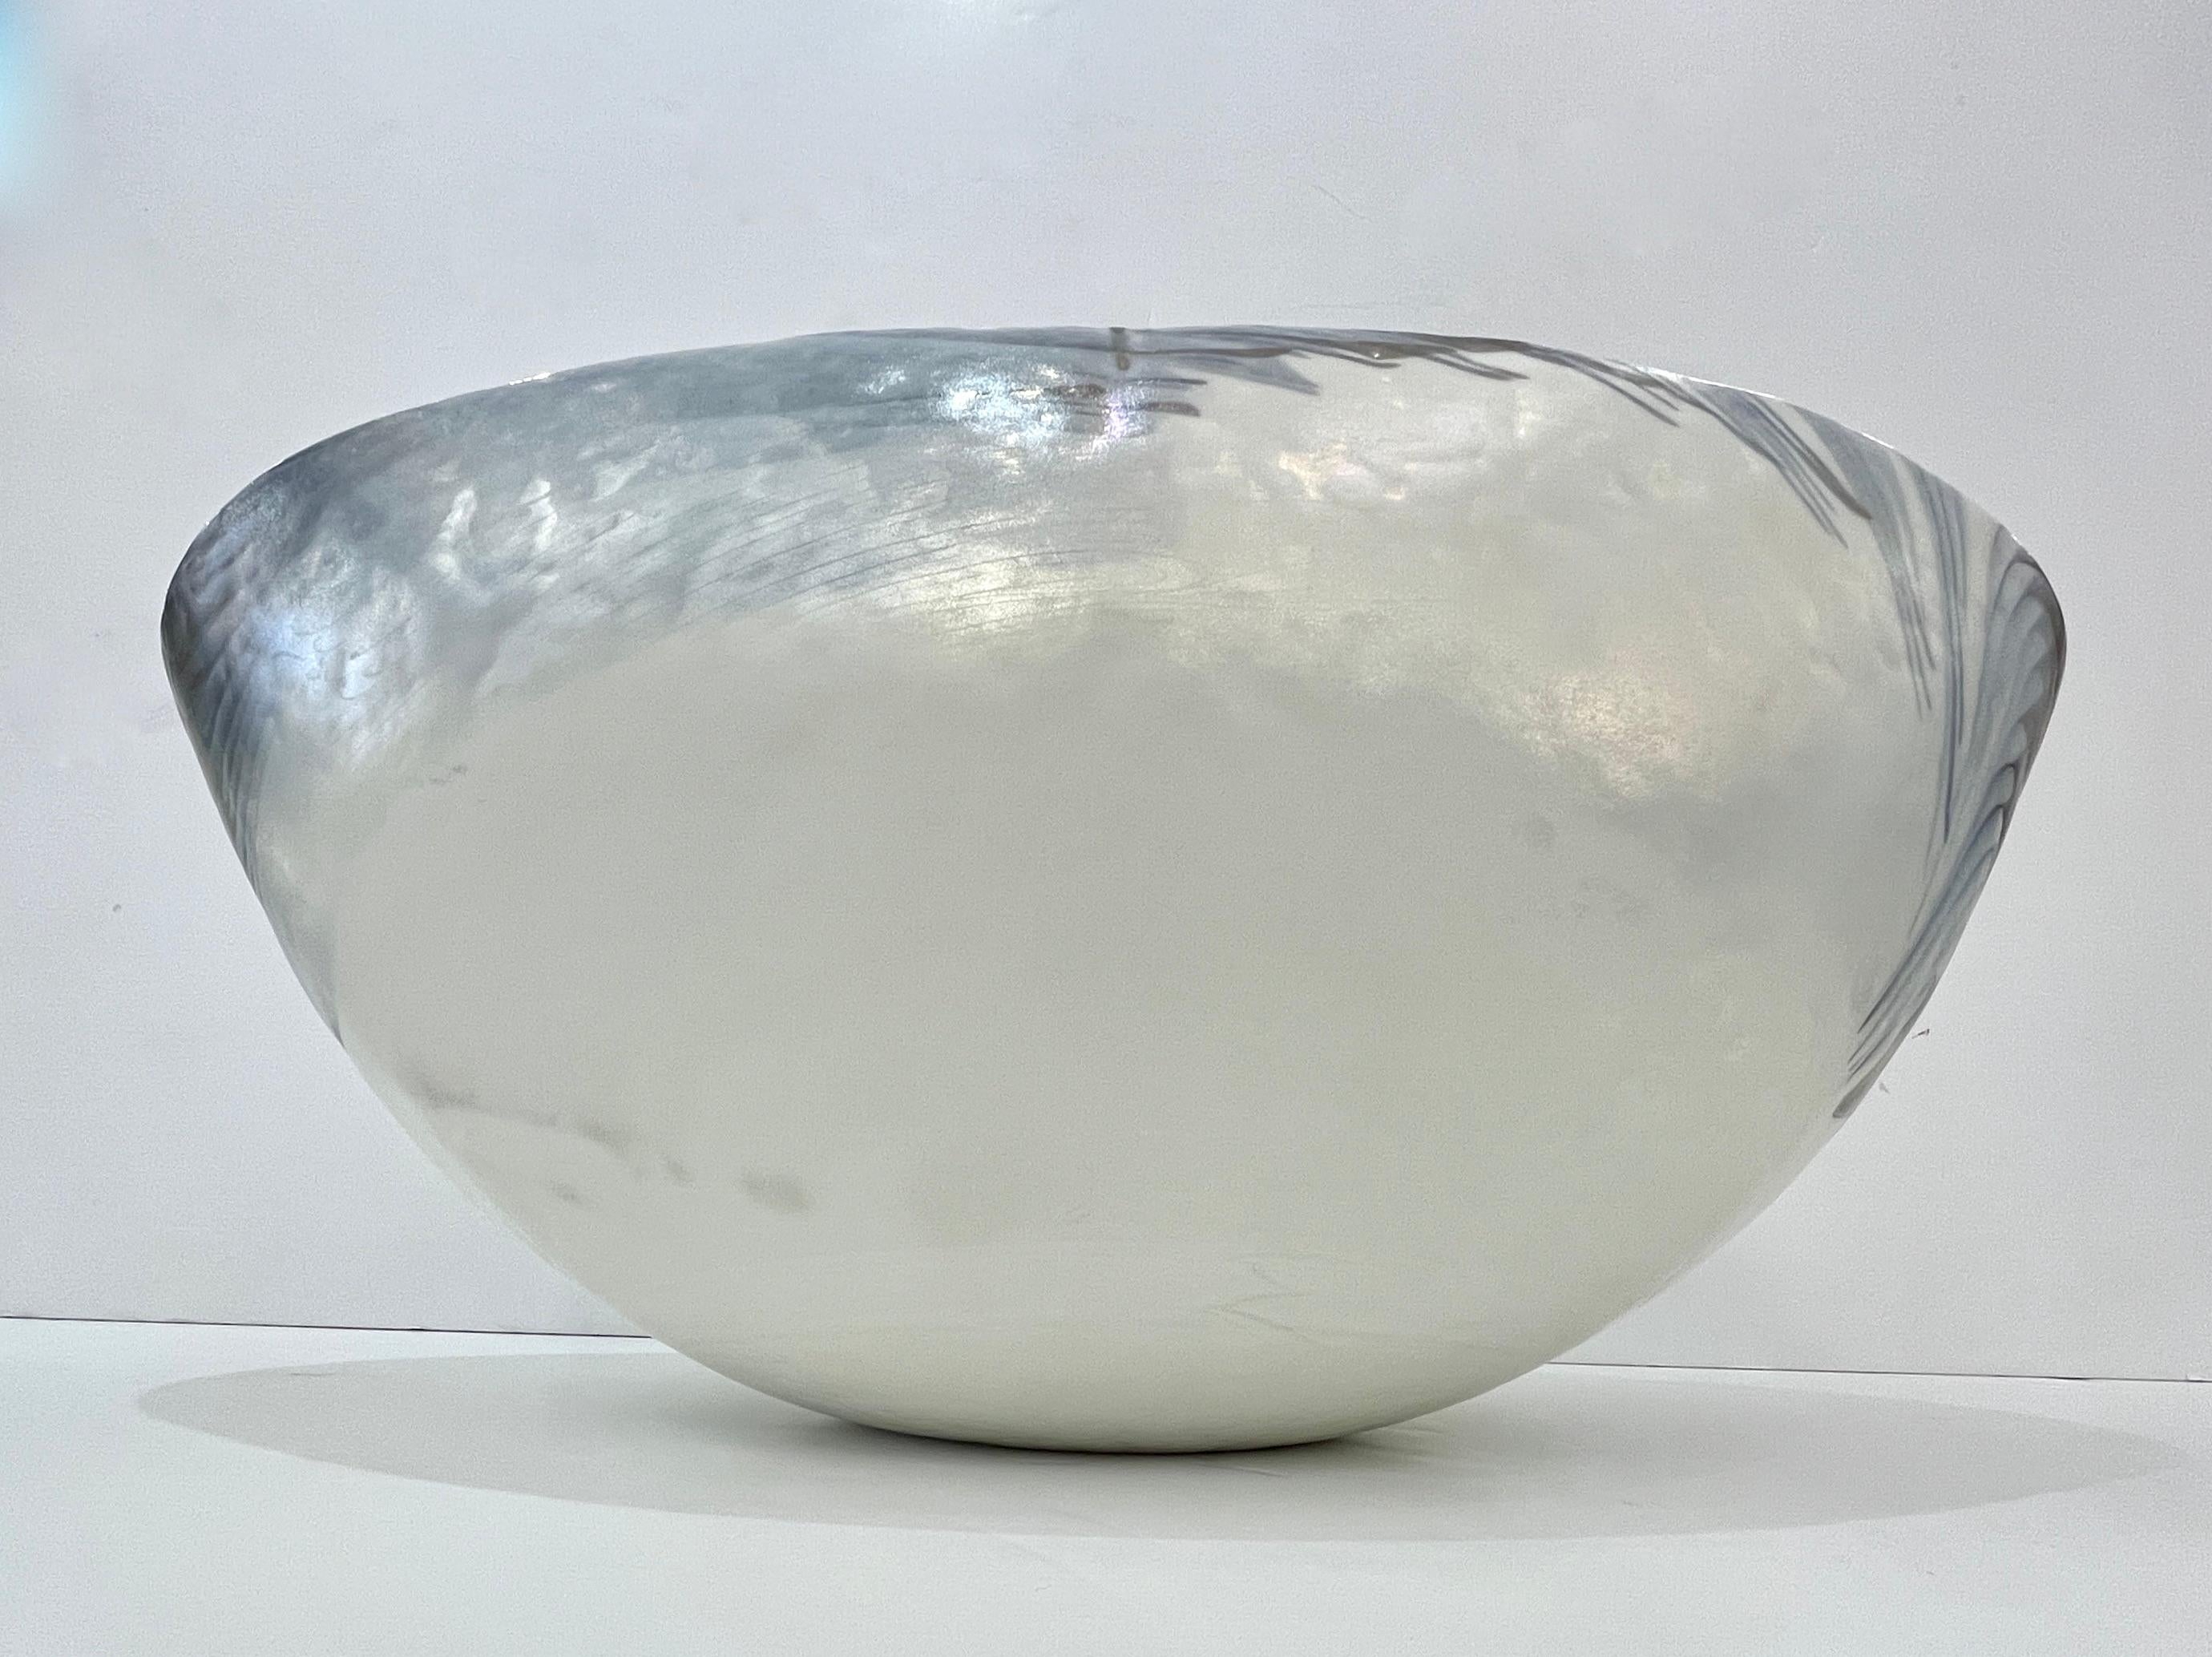 2000 Italian Blue Gray White Taupe Iridescent Murano Glass Monumental Shell Bowl For Sale 5